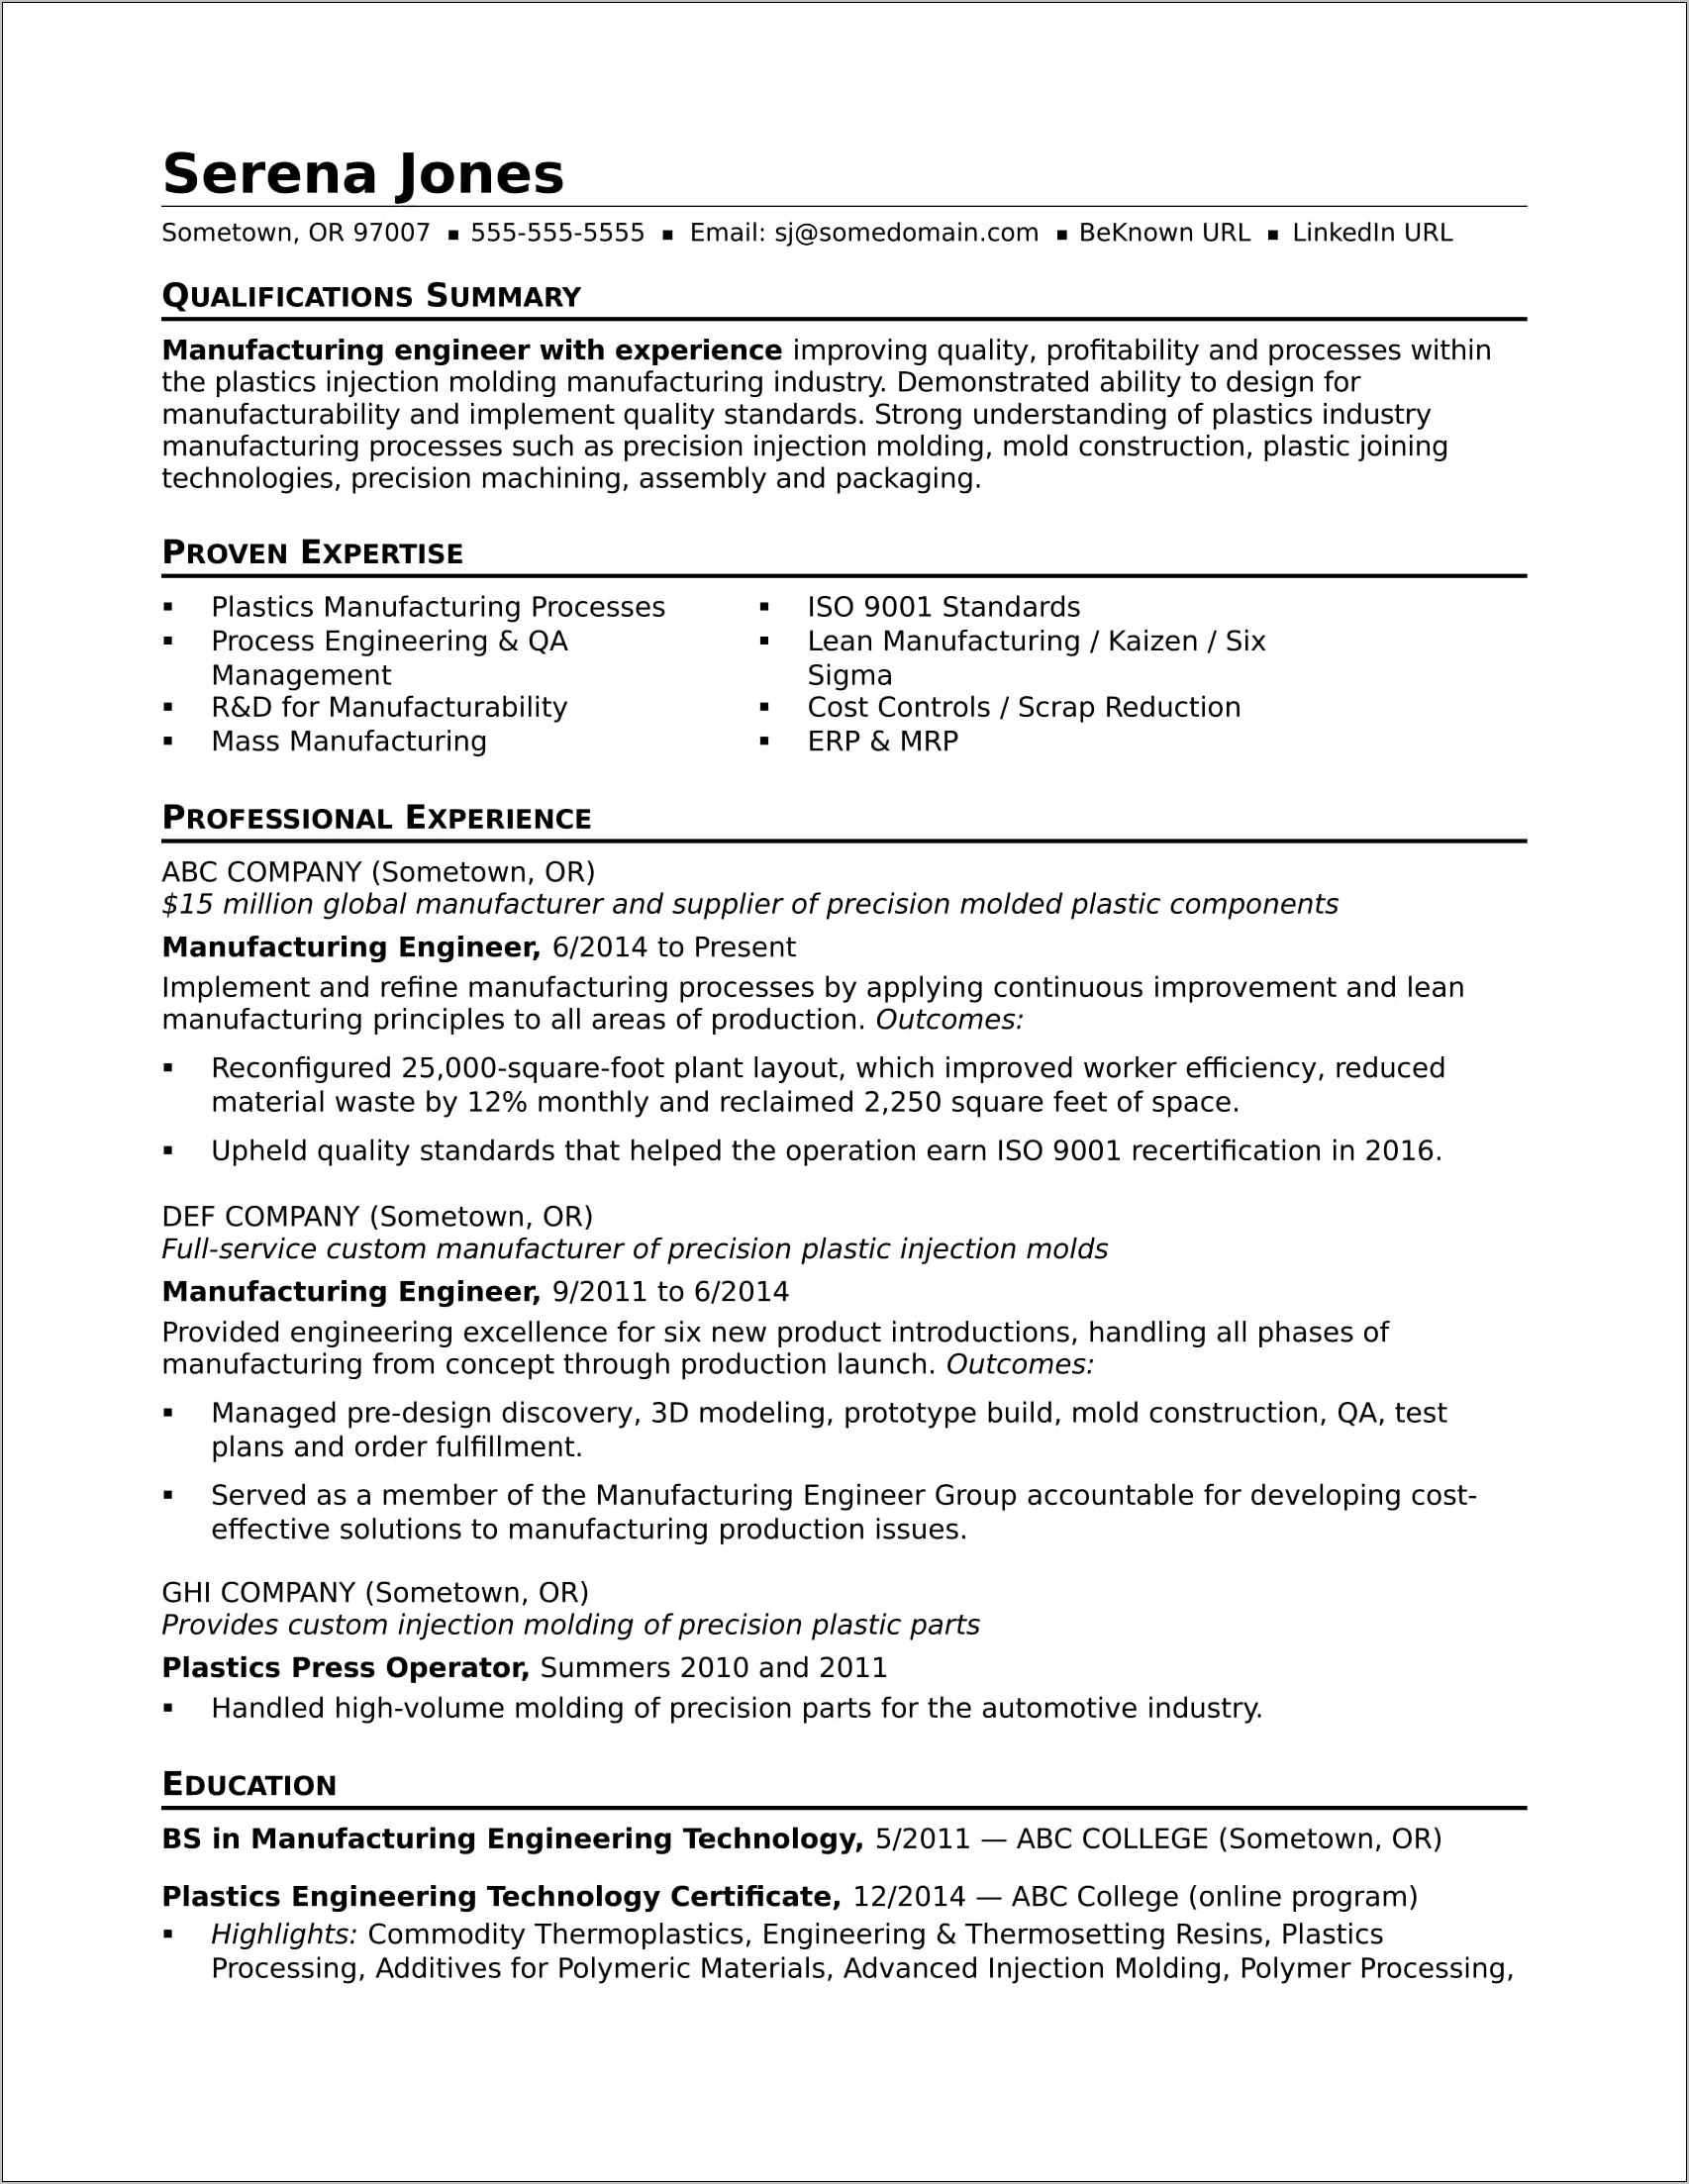 Examples Of Summary Of Qualifications In Resume